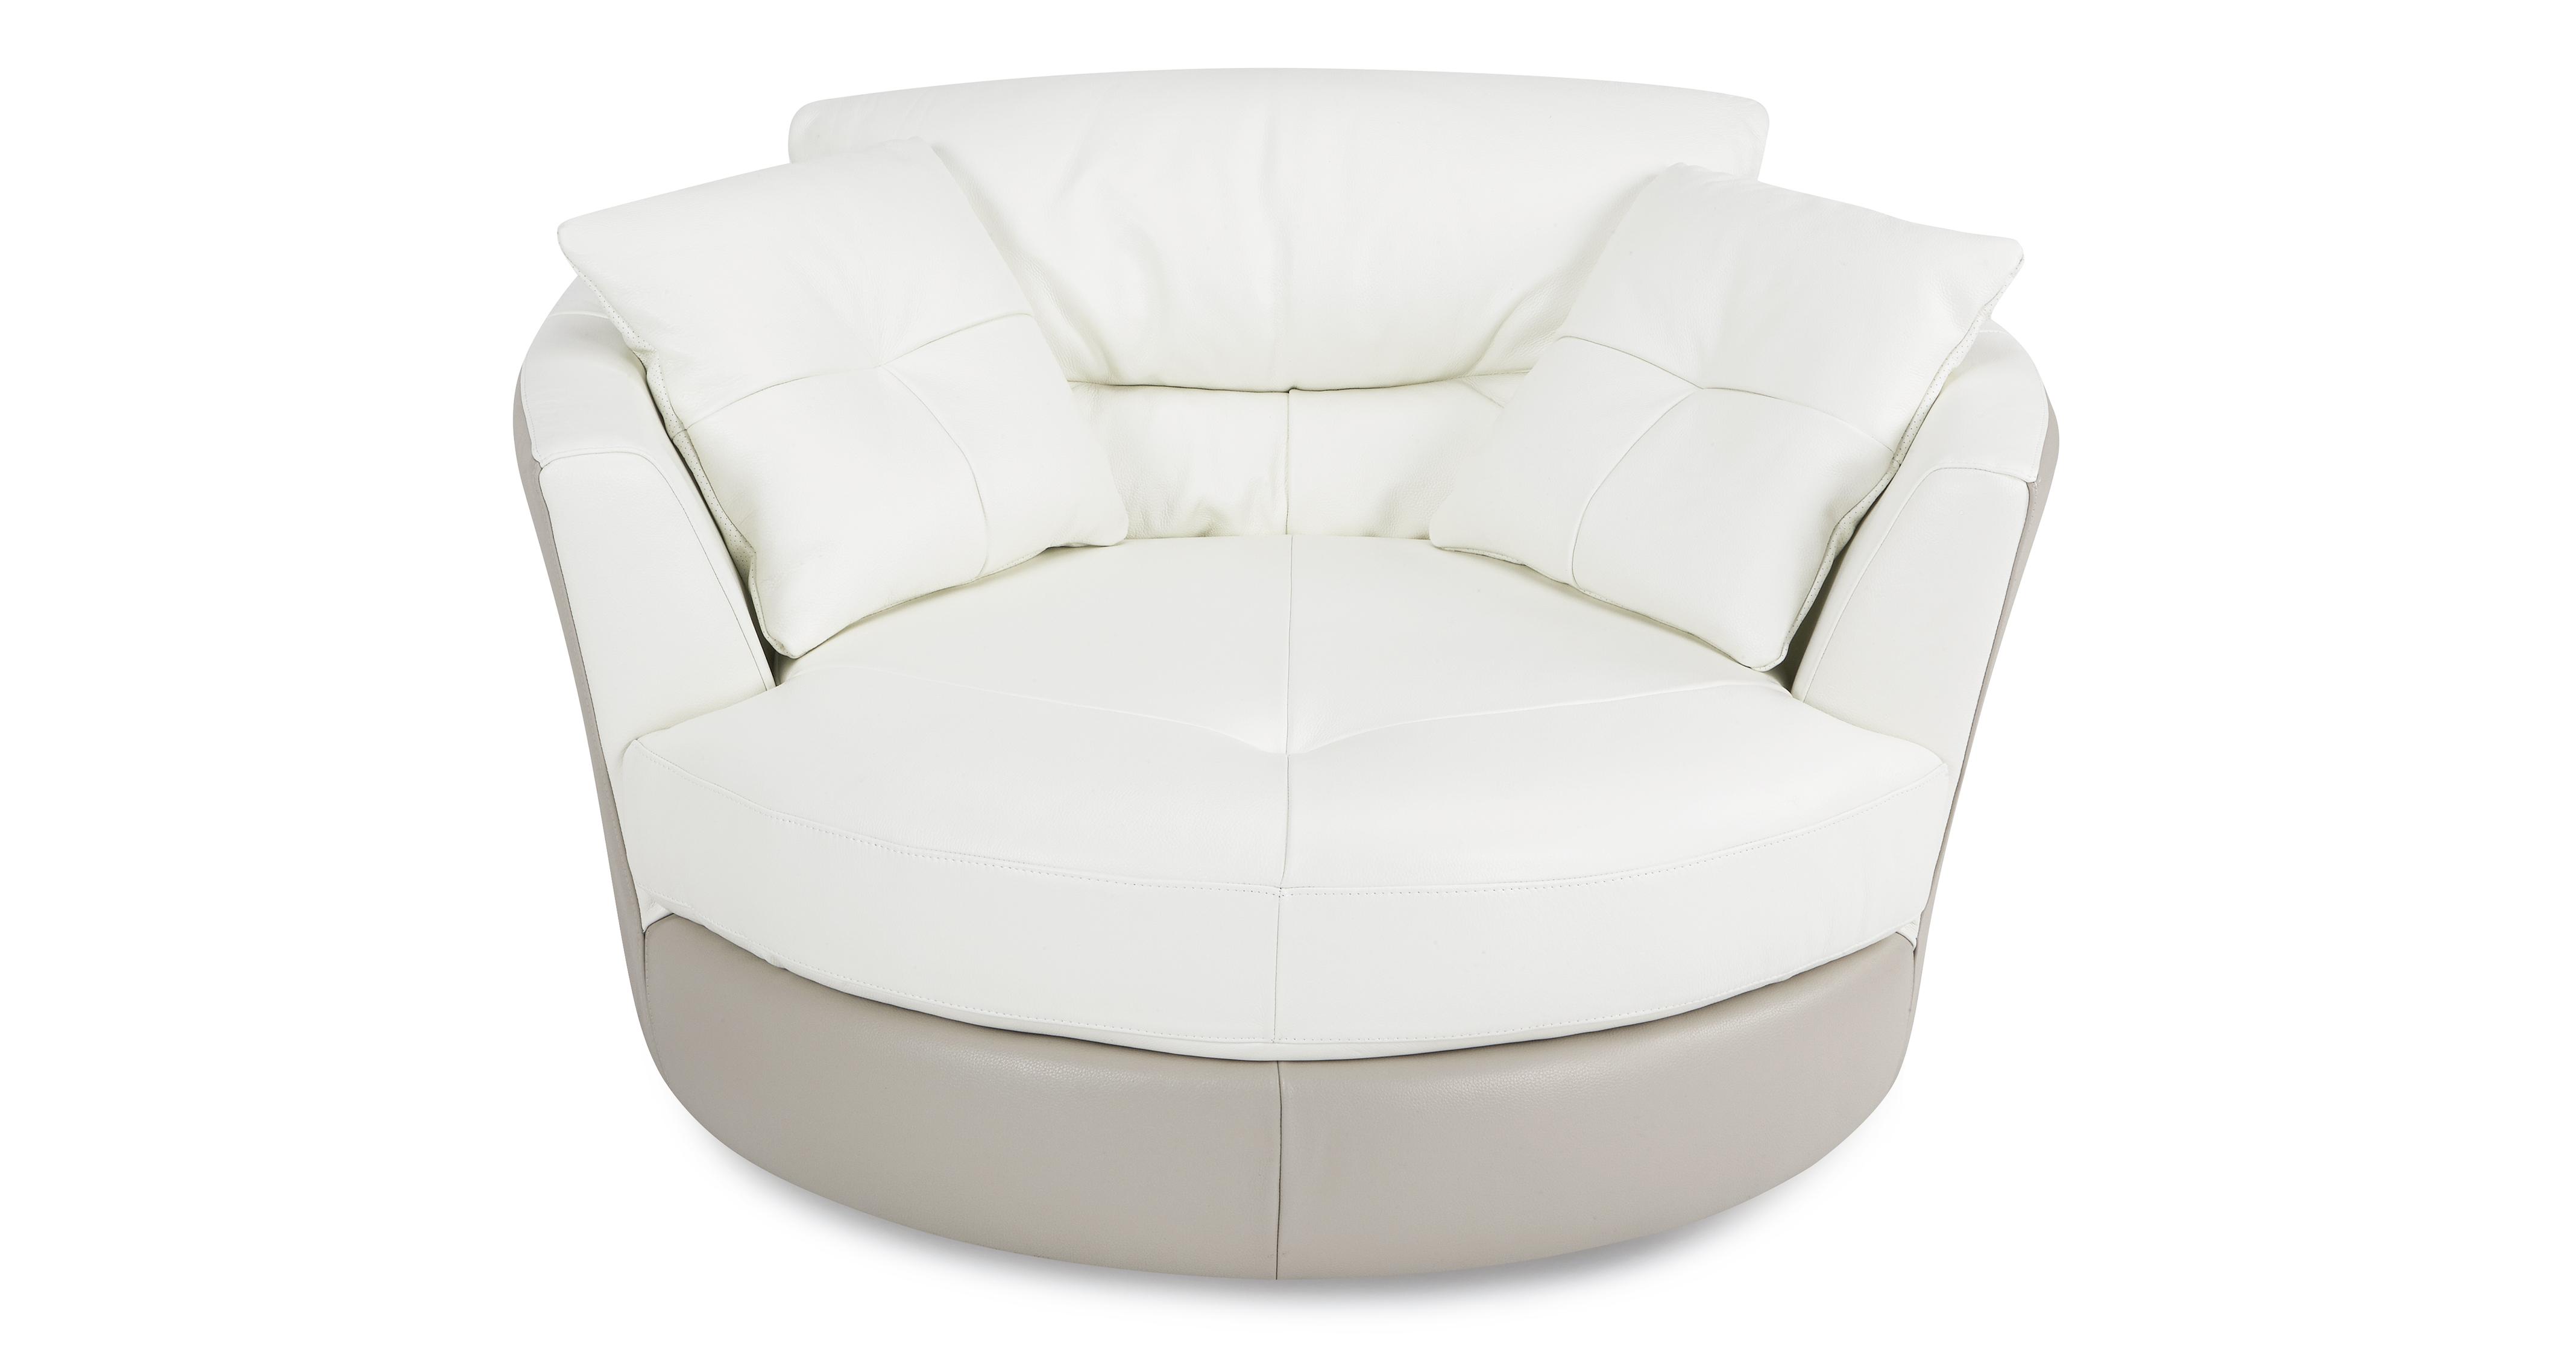 Stage Large Swivel Chair New Club Dfs, White Leather Swivel Recliner